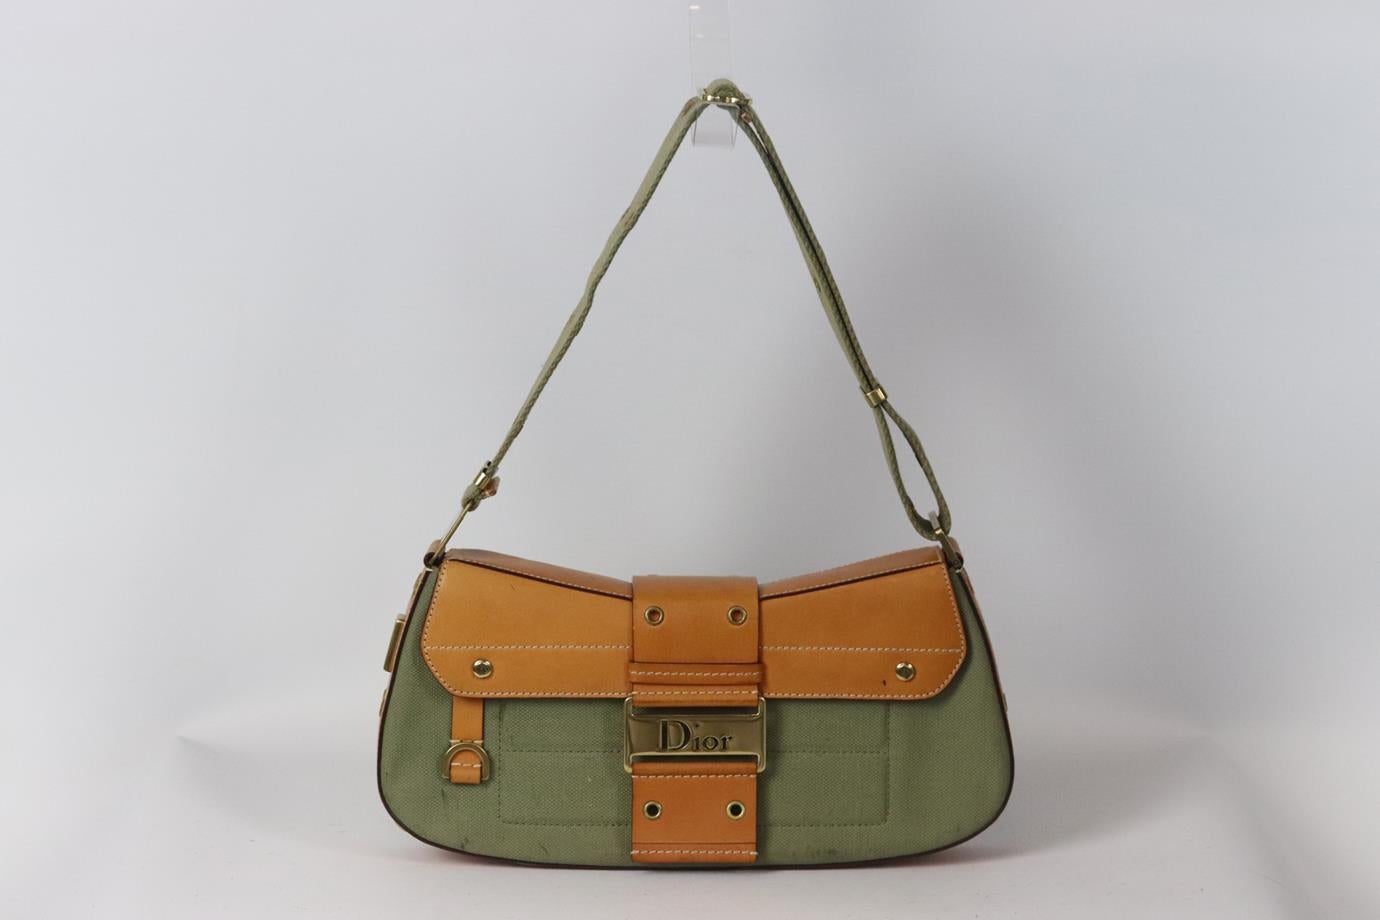 Christian Dior Columbus canvas and leather shoulder bag. Khaki and tan. Magnetic snap fastening at front. Protective plastic attached to hardware. Comes with authenticity card. Does not come with dustbag or box. Height: 6.5 in. Width: 12 in. Depth: